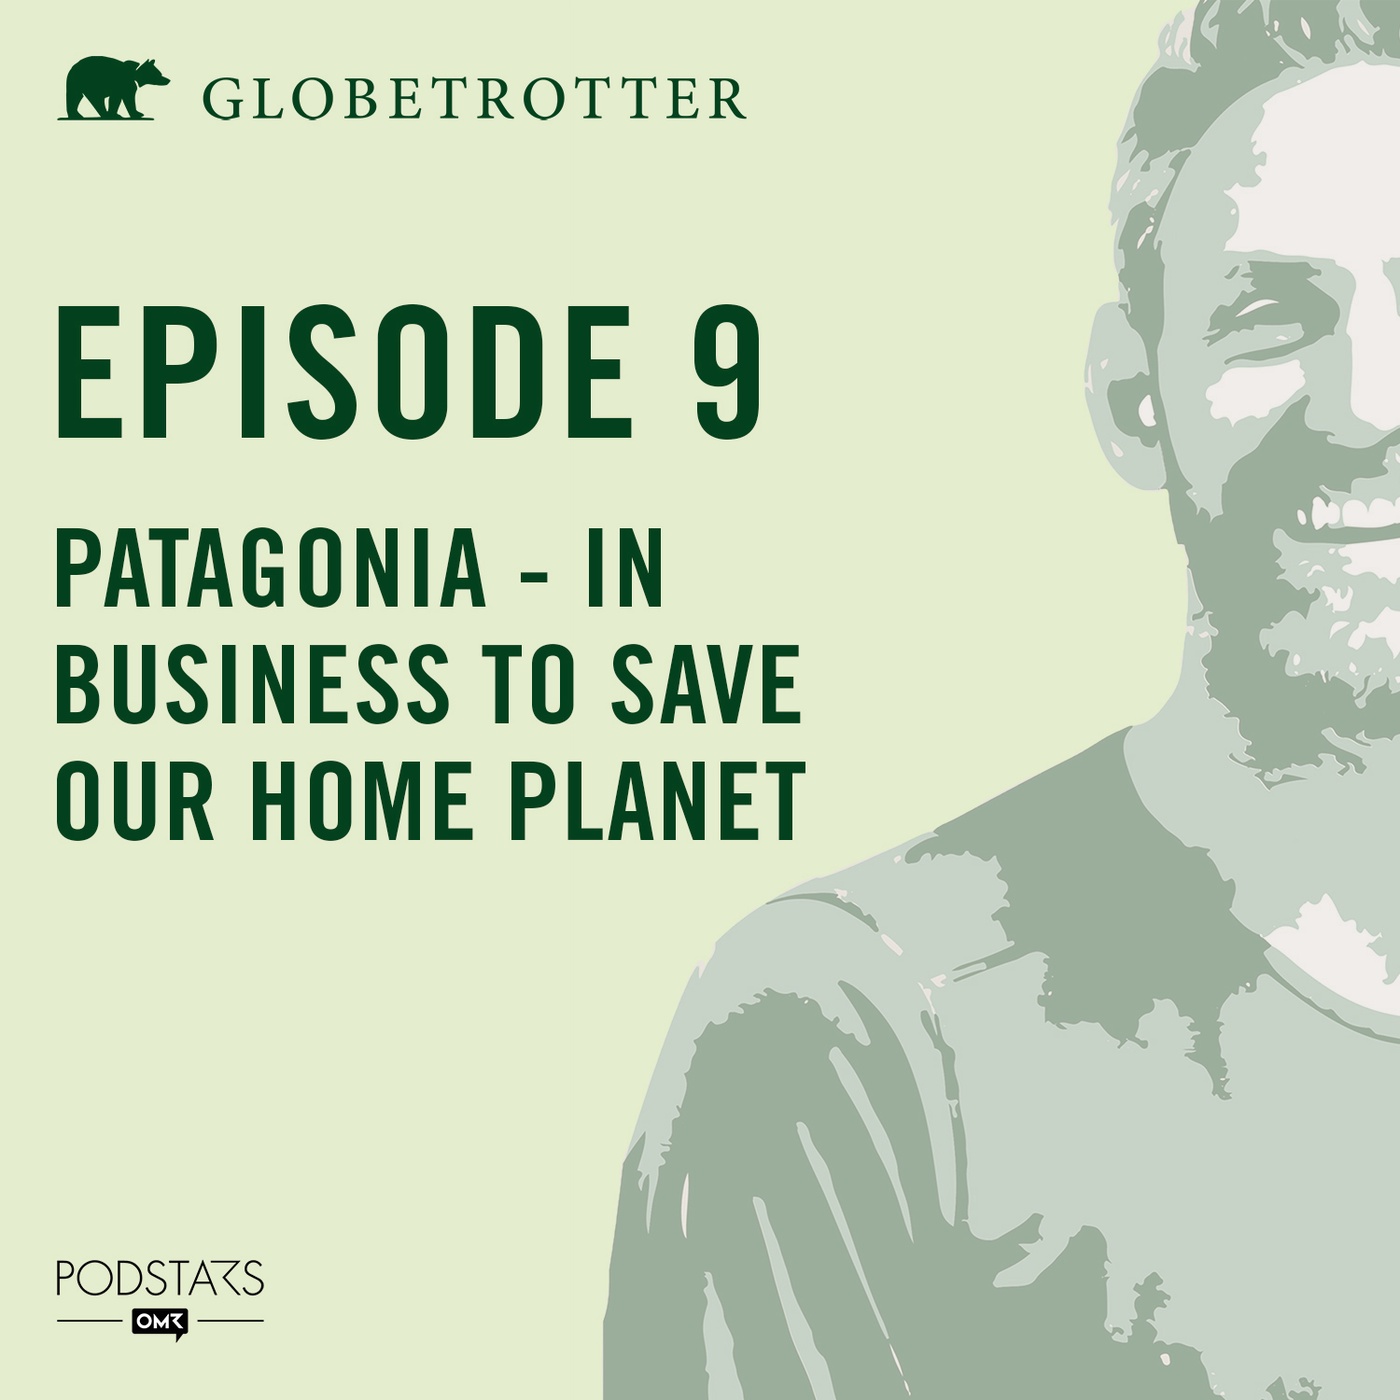 Patagonia - In business to save our home planet